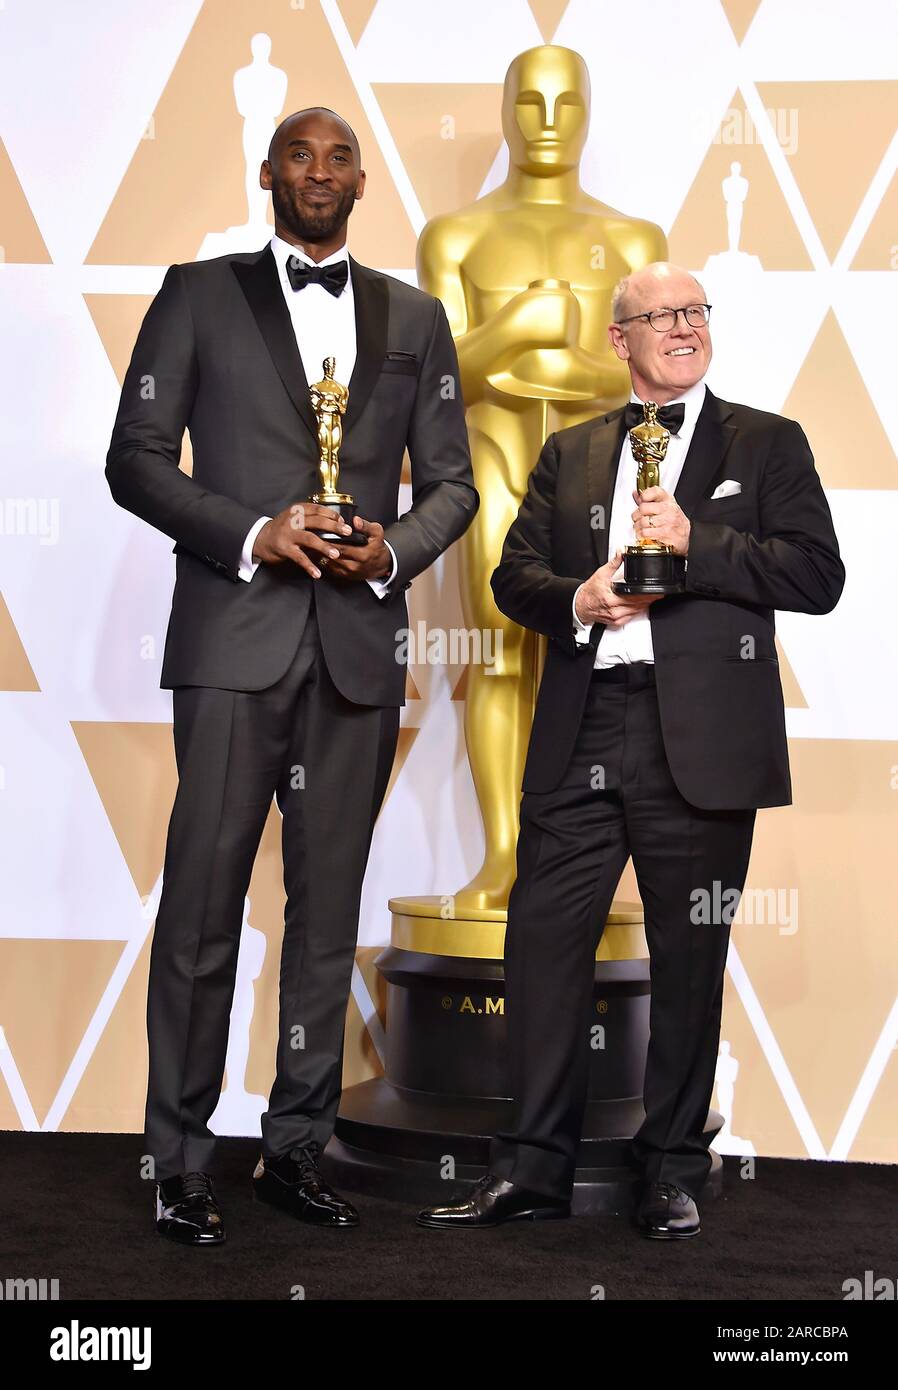 HOLLYWOOD, CA - MARCH 04: Filmmakers Kobe Bryant (L) and Glen Keane, winners of the Animated Short award for ?Dear Basketball? pose in the press room during the 90th Annual Academy Awards at Hollywood & Highland Center on March 4, 2018 in Hollywood, California. Stock Photo